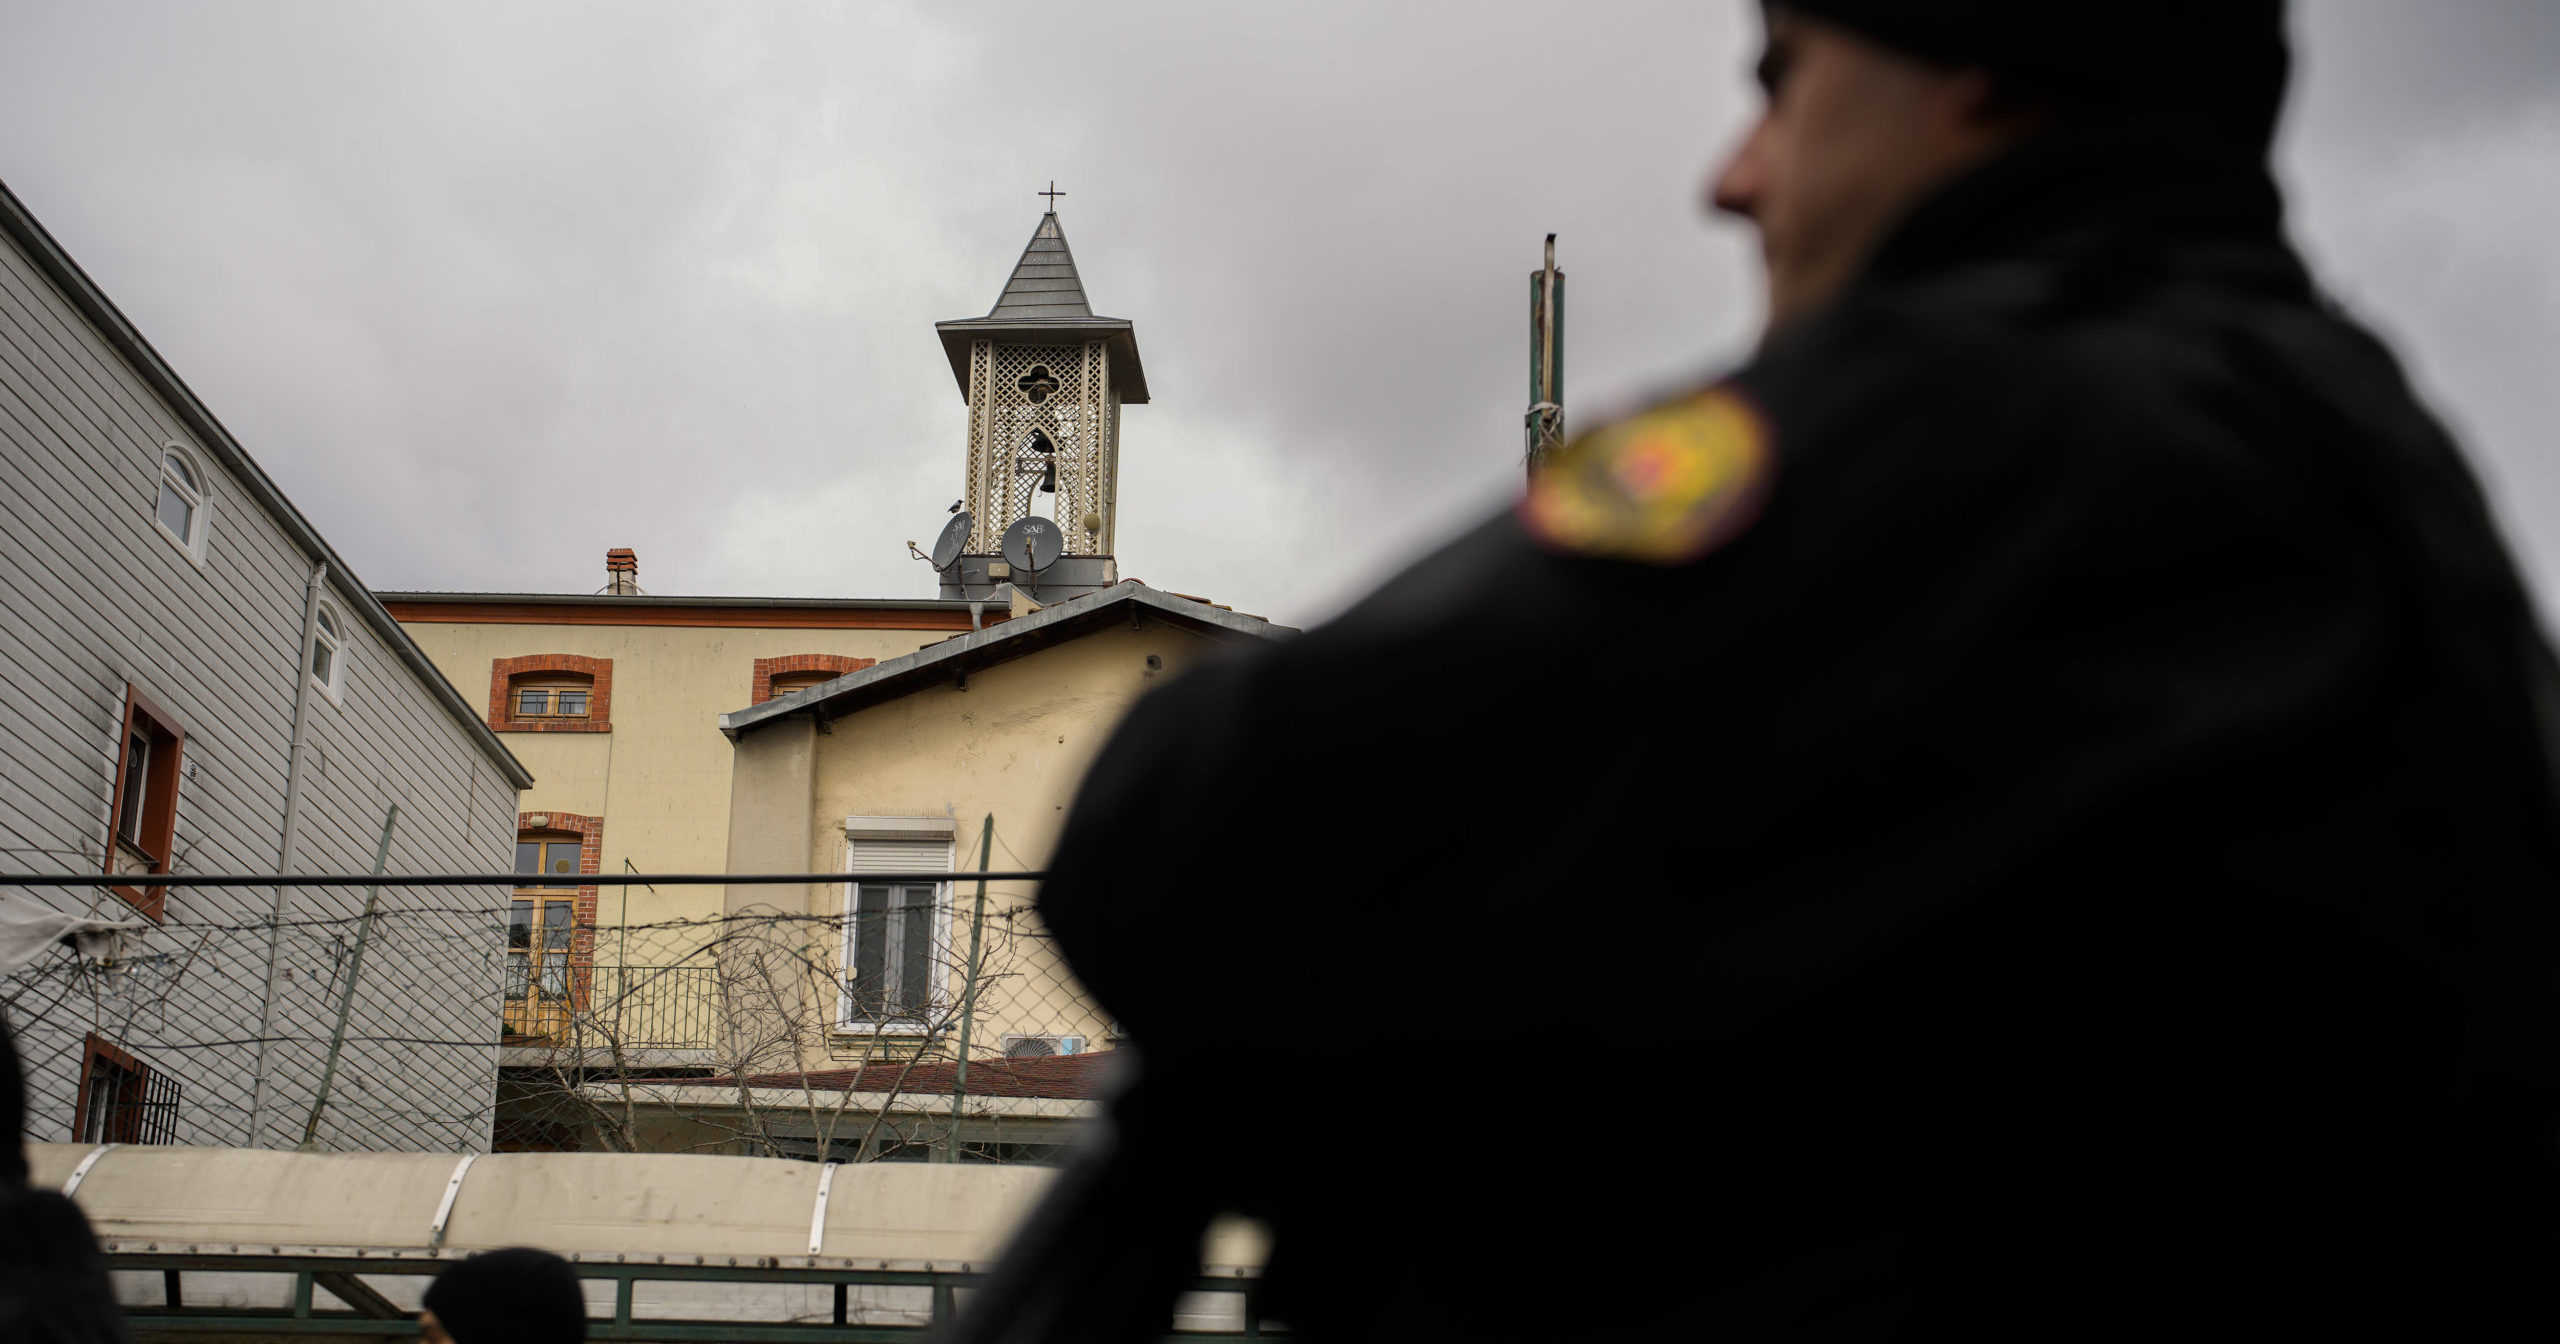 Turkish police officers stand guard in a cordoned-off area outside the Santa Maria church in Istanbul on Sunday.